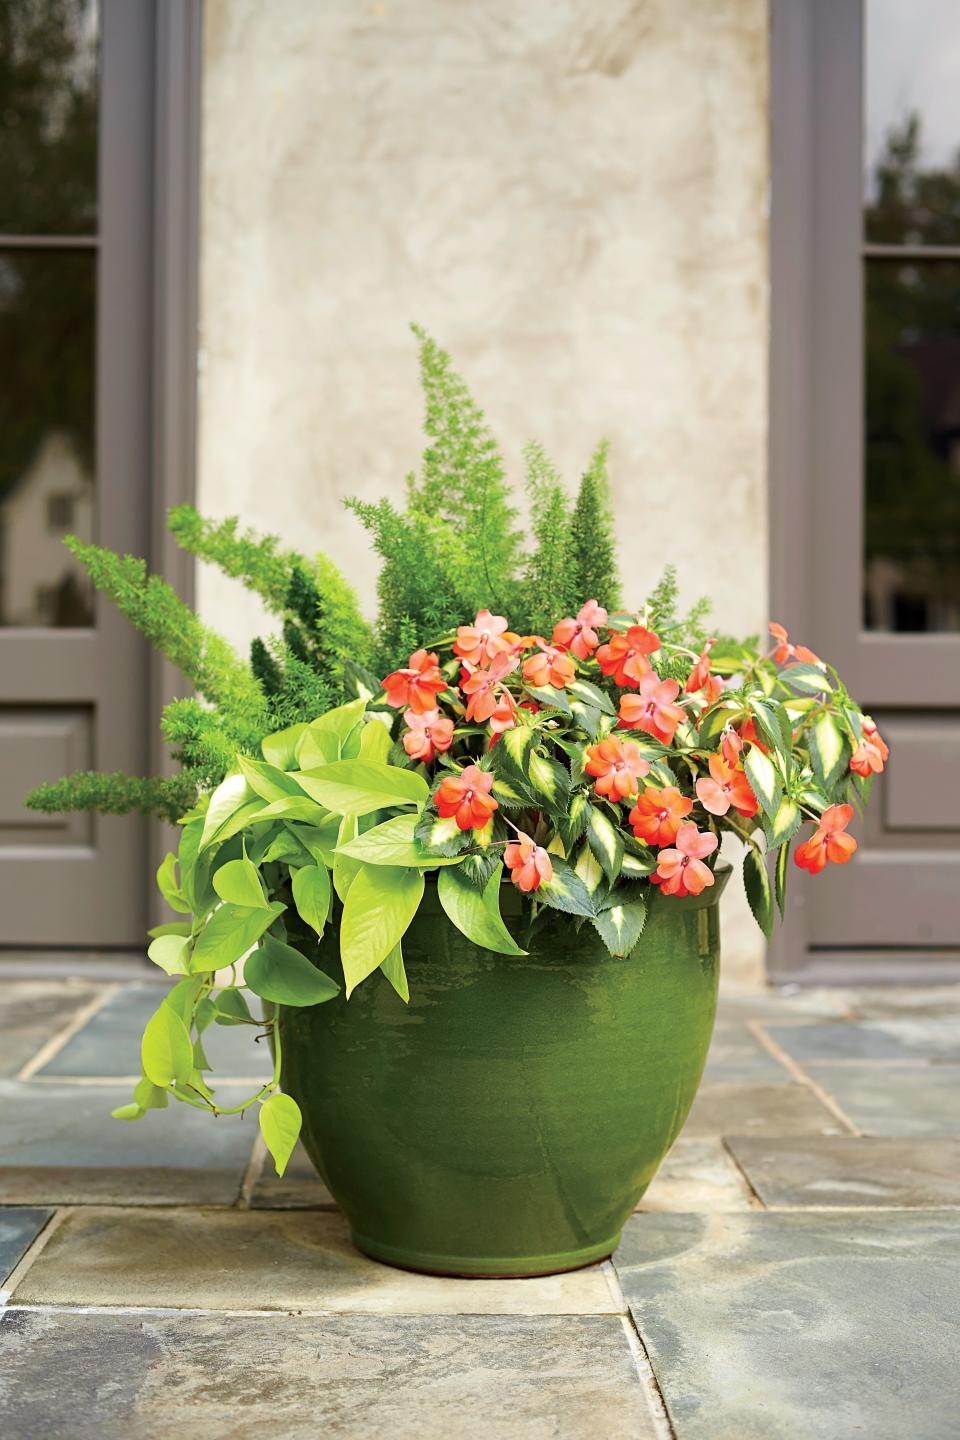 <p>Here it comes—a beautiful container in the sun, that is. This high-drama, low-maintenance container spotlights 'Variegated Spreading Salmon' SunPatiens, but leaves room for a foxtail asparagus fern and a 6-inch pot of 'Neon' pothos. Everything is set in a glazed-ceramic container, its bright green finish complementing the natural colors of the plantings. This is a beautiful example of the keeping it simple container-garden aesthetic. Let the SunPatiens—a strain that resulted from a cross between a New Guinea hybrids and a wild species—be the bright, central focus of this arrangement. Then, let everything else simply help them shine. </p>